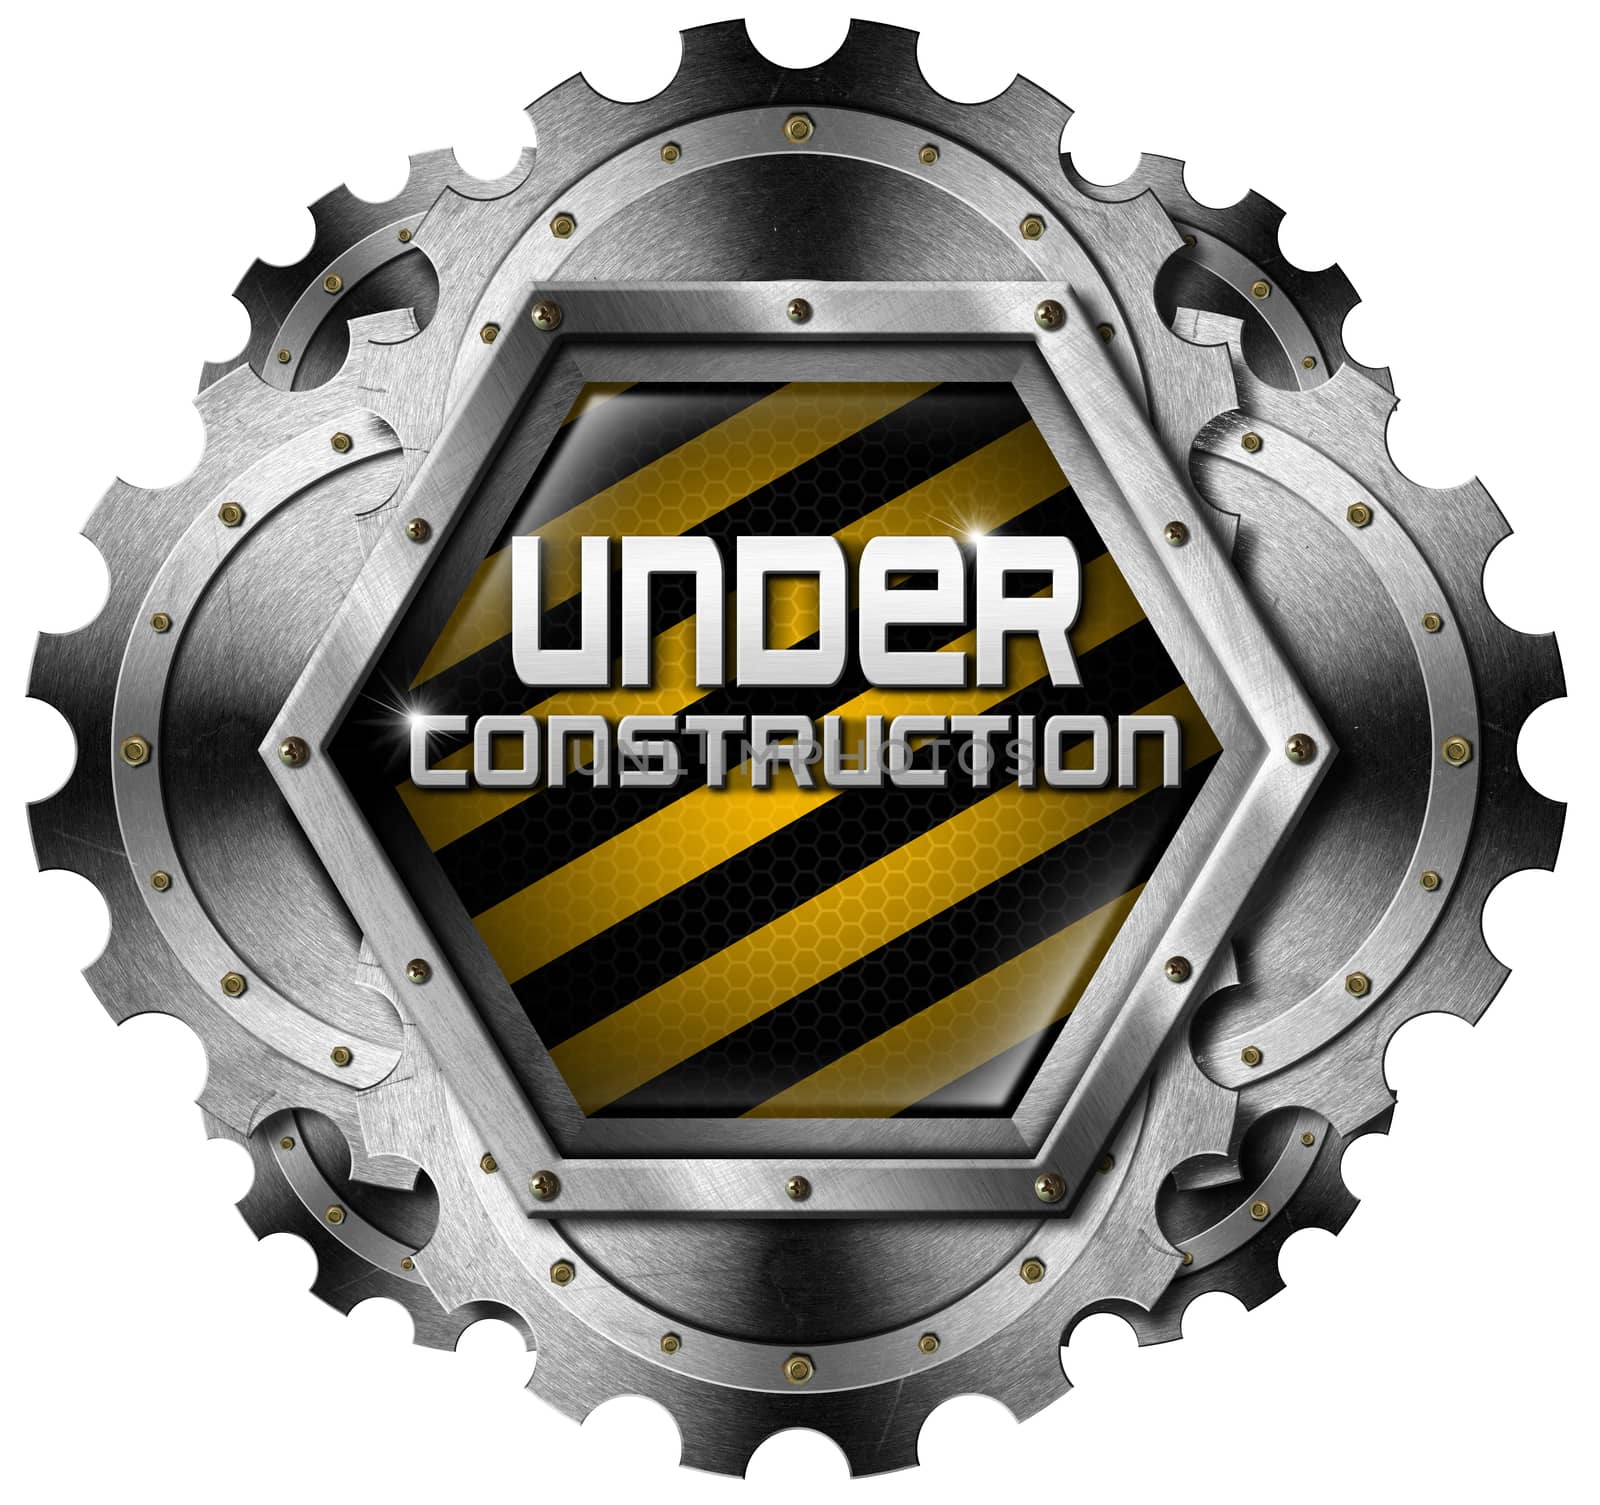 Hexagonal and metallic icon or symbol with gears and text under construction. Isolated on white background